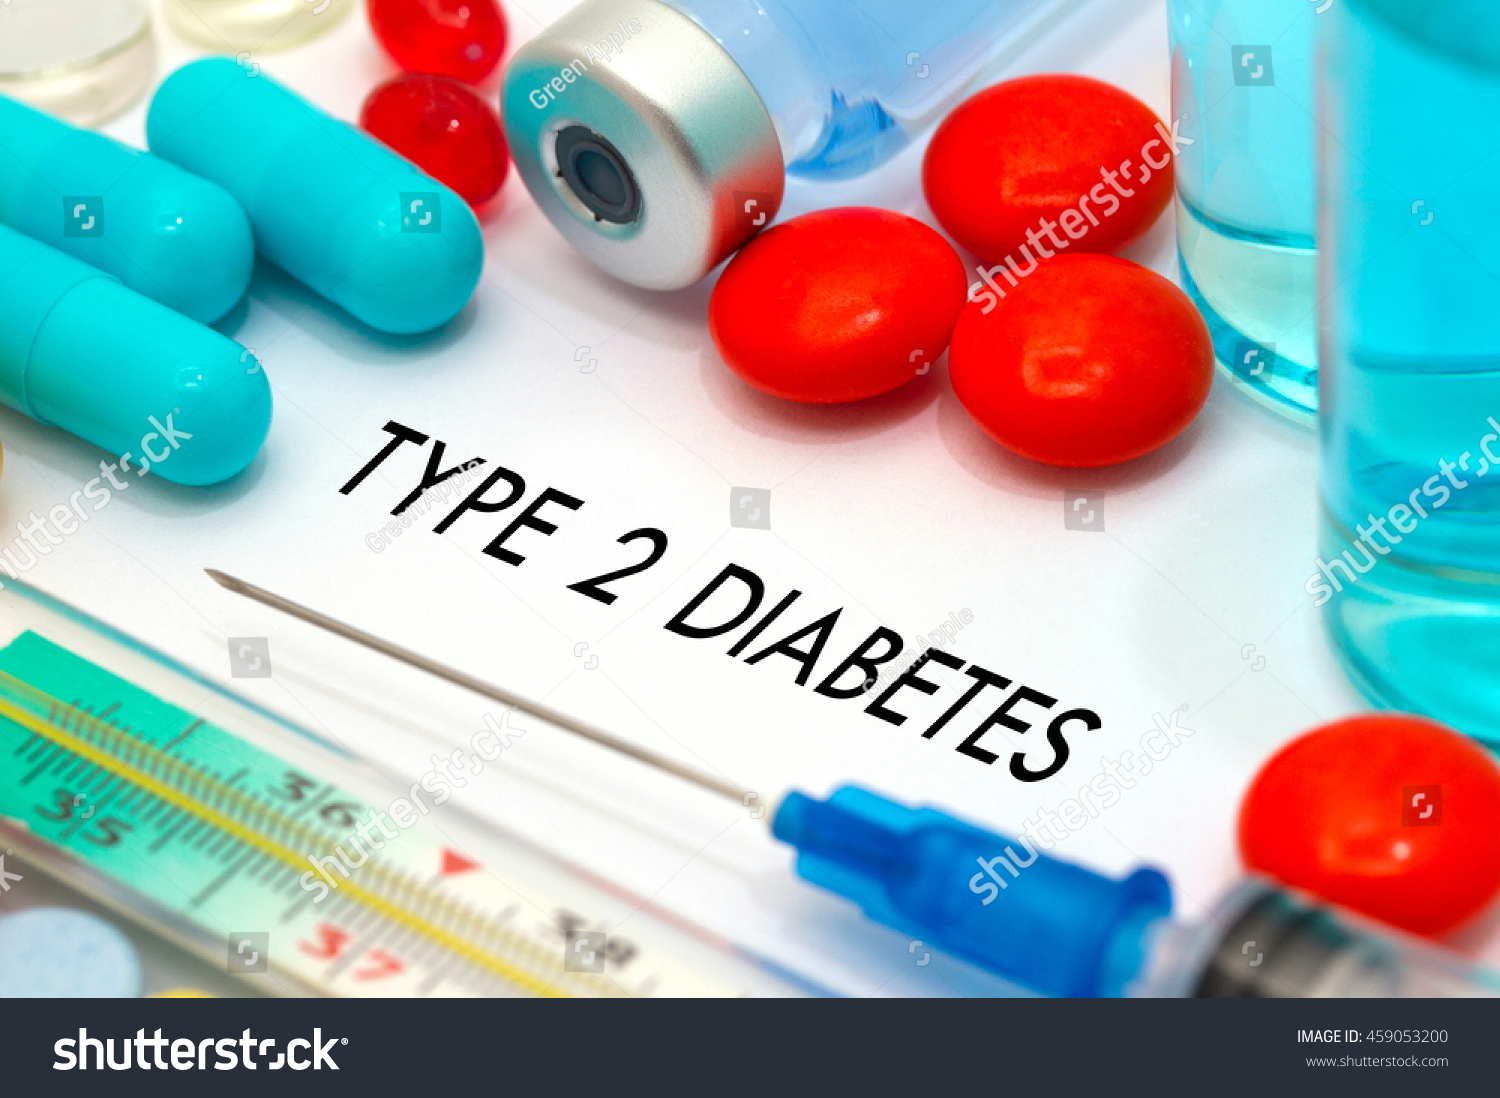 type 2 diabetes. Treatment and prevention of disease. Syringe and vaccine. Medical concept. Selective focus #459053200